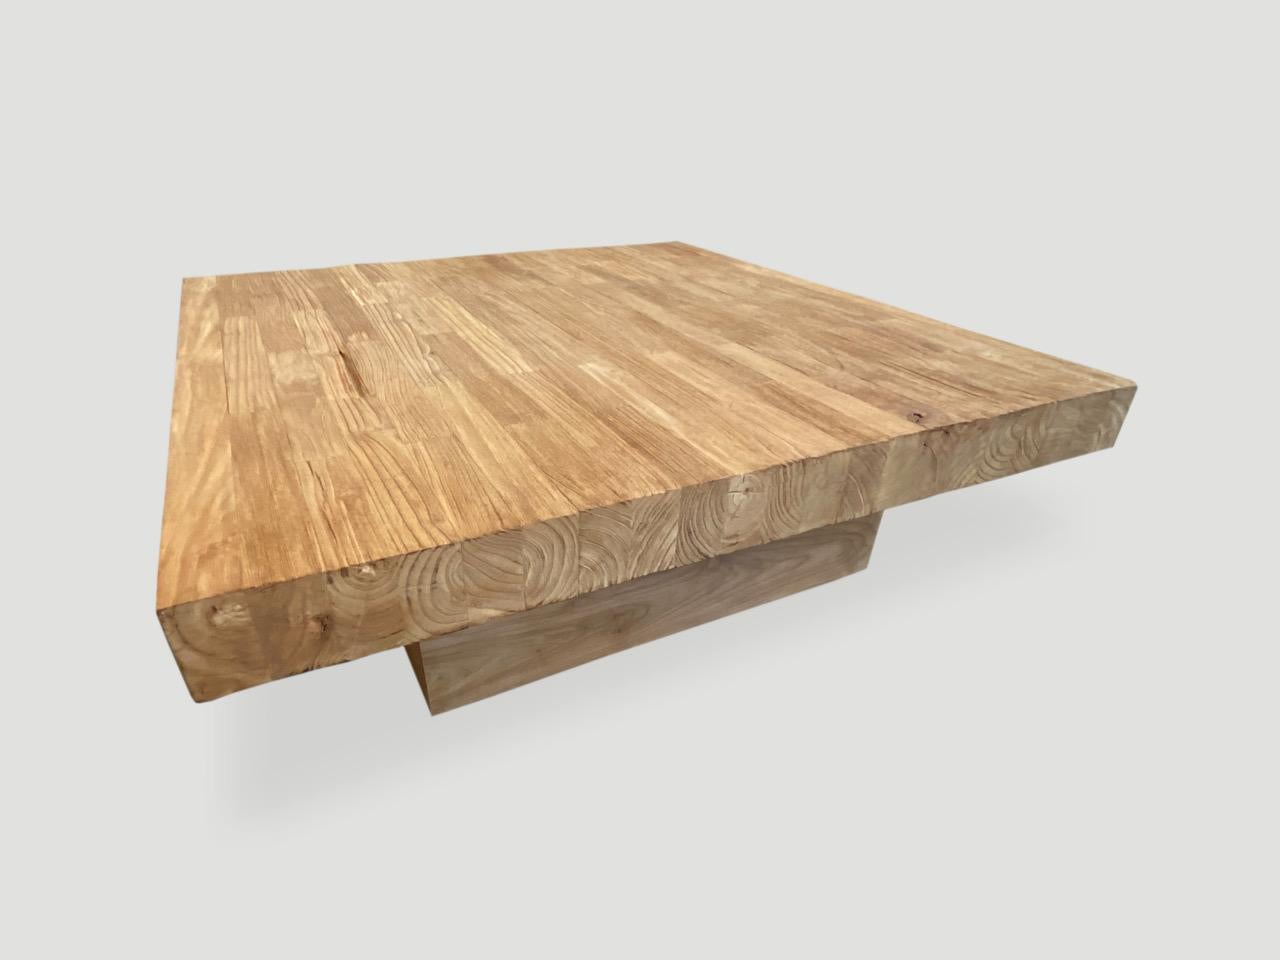 Reclaimed natural teak coffee table with a four inch thick top. Solid teak logs are joined together to produce this impressive coffee table which floats on a modern teak base. 

Own an Andrianna Shamaris original.

Andrianna Shamaris. The Leader In